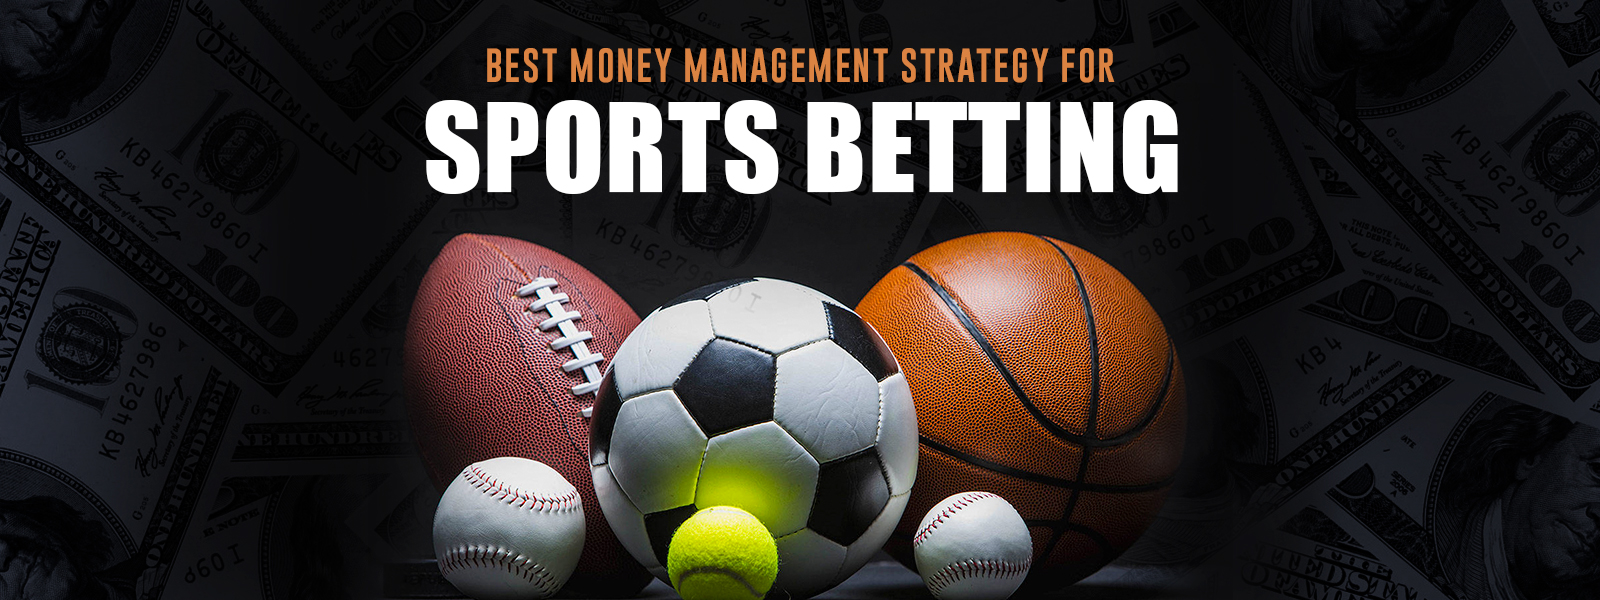 Kelly Criterion - Best Money Management Strategy for Sports Betting